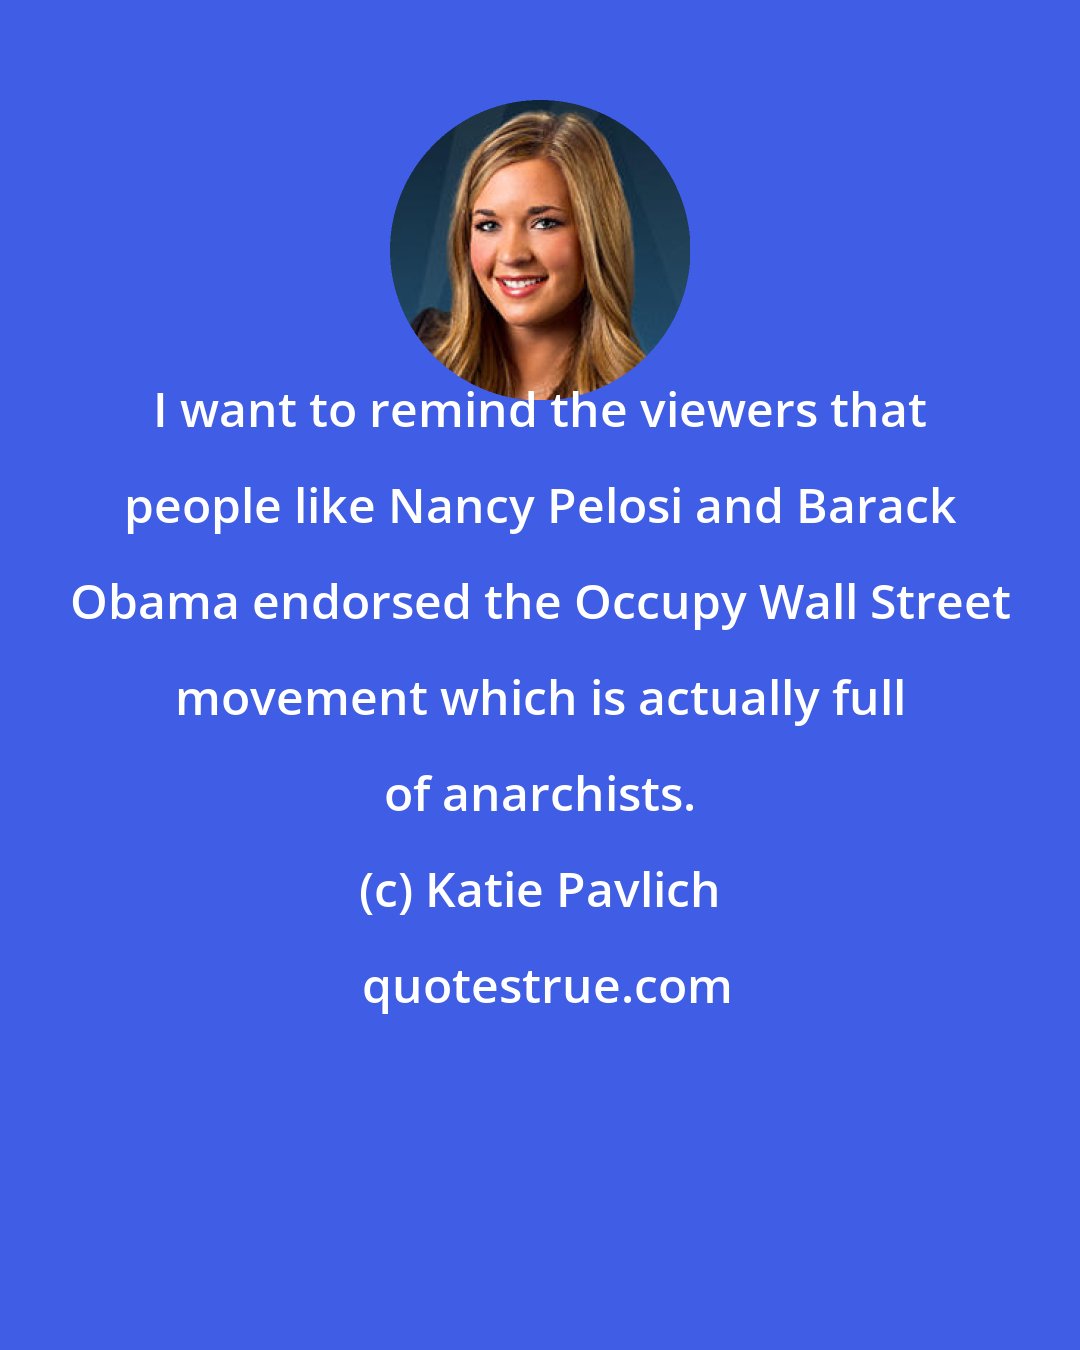 Katie Pavlich: I want to remind the viewers that people like Nancy Pelosi and Barack Obama endorsed the Occupy Wall Street movement which is actually full of anarchists.